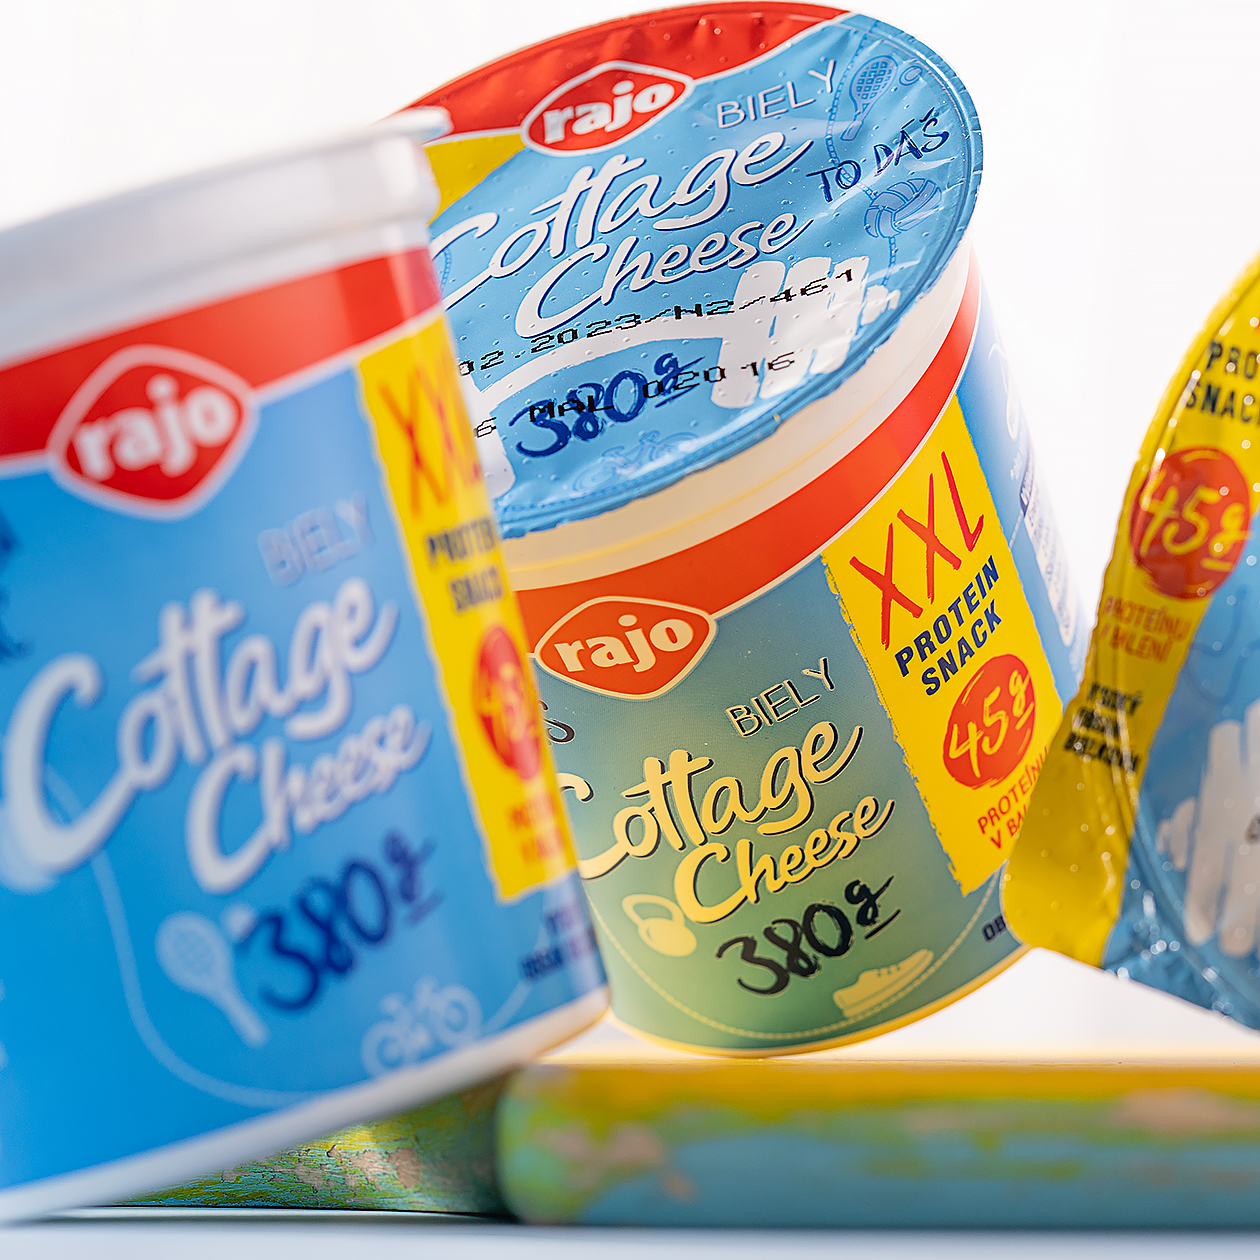 rajo cottage cheese 380g packaging